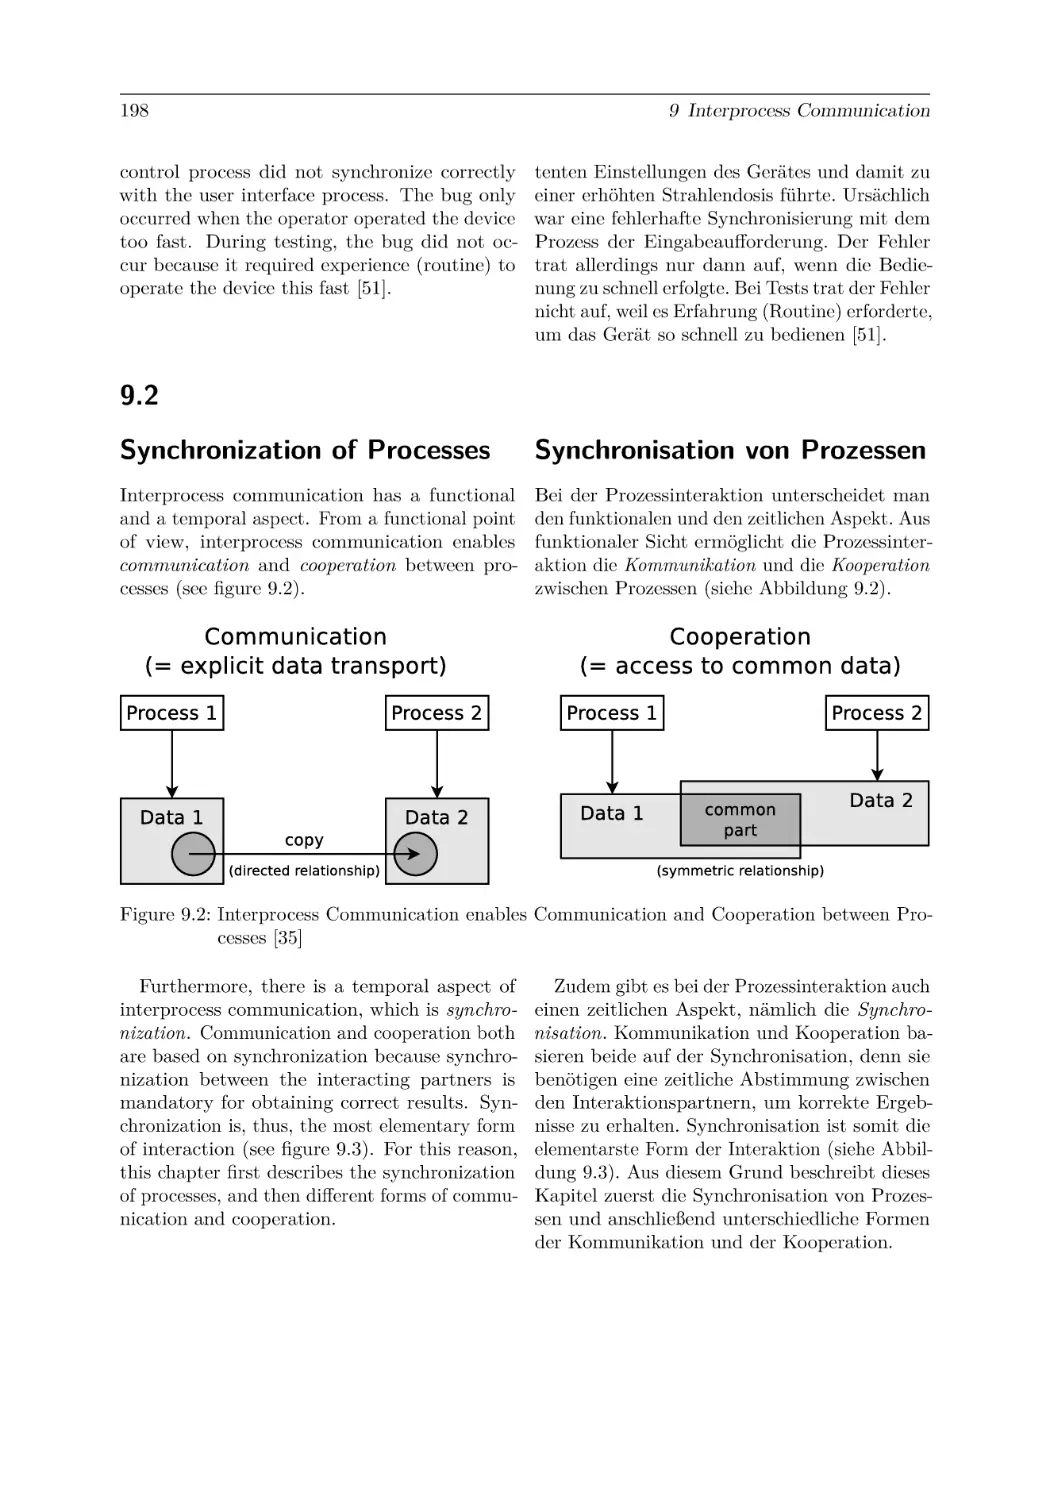 9.2
Synchronization of Processes